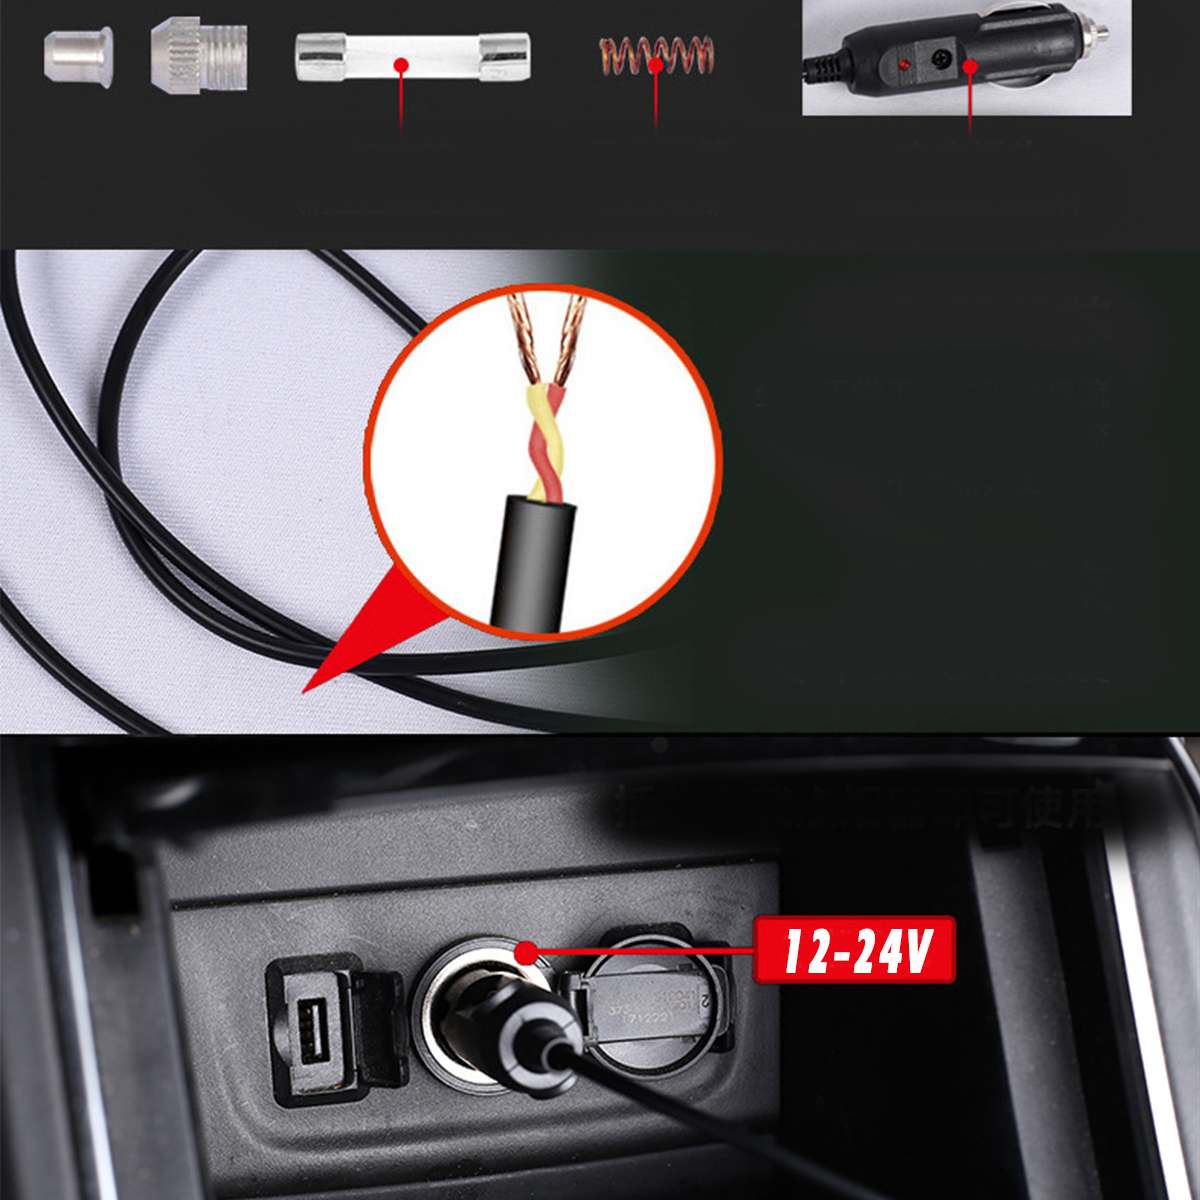 12/24V Universal Auto Car Seat Heated Cover Cushion Pad Mat Front Protector Fast Electric Heated Adjustable Warm Winter 3 Mode